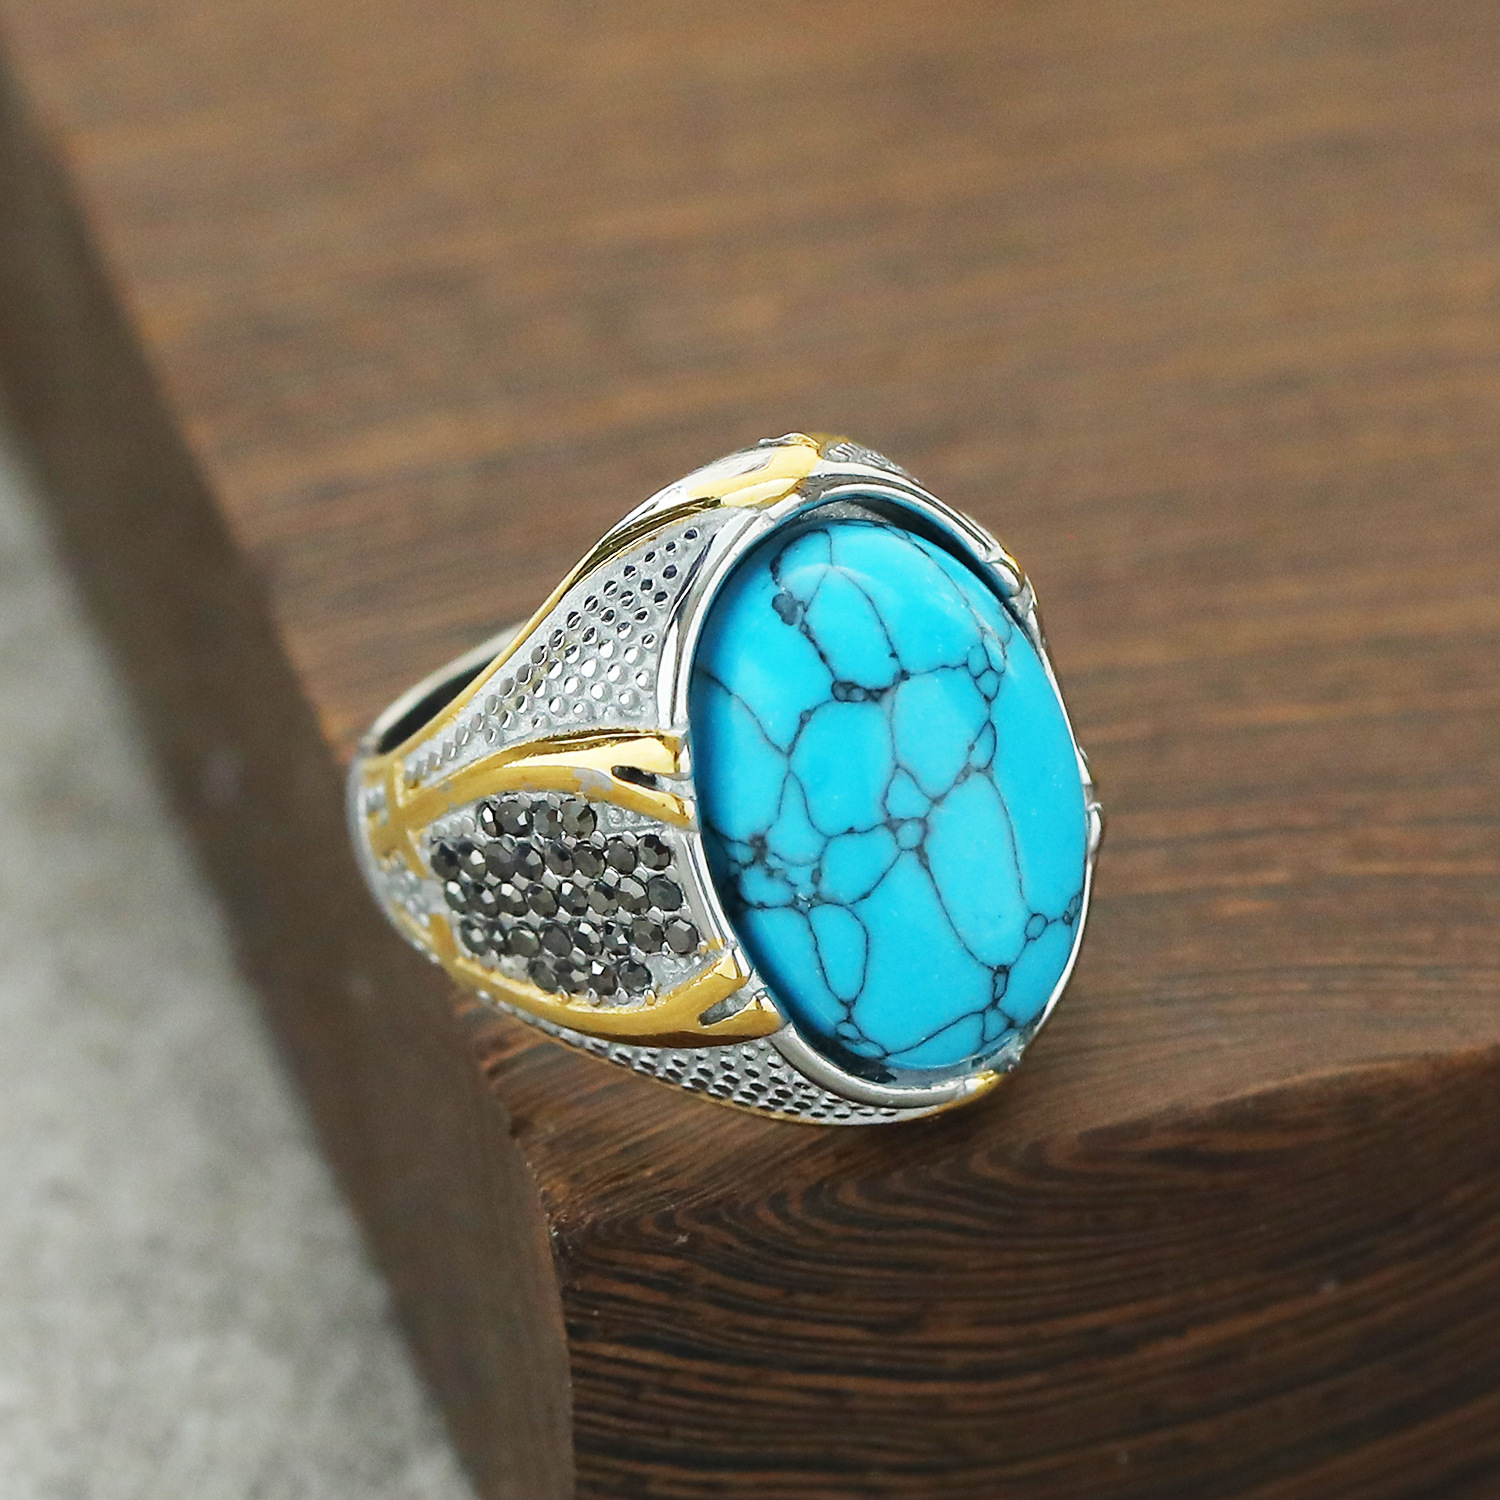 25:Steel color and gold blue turquoise